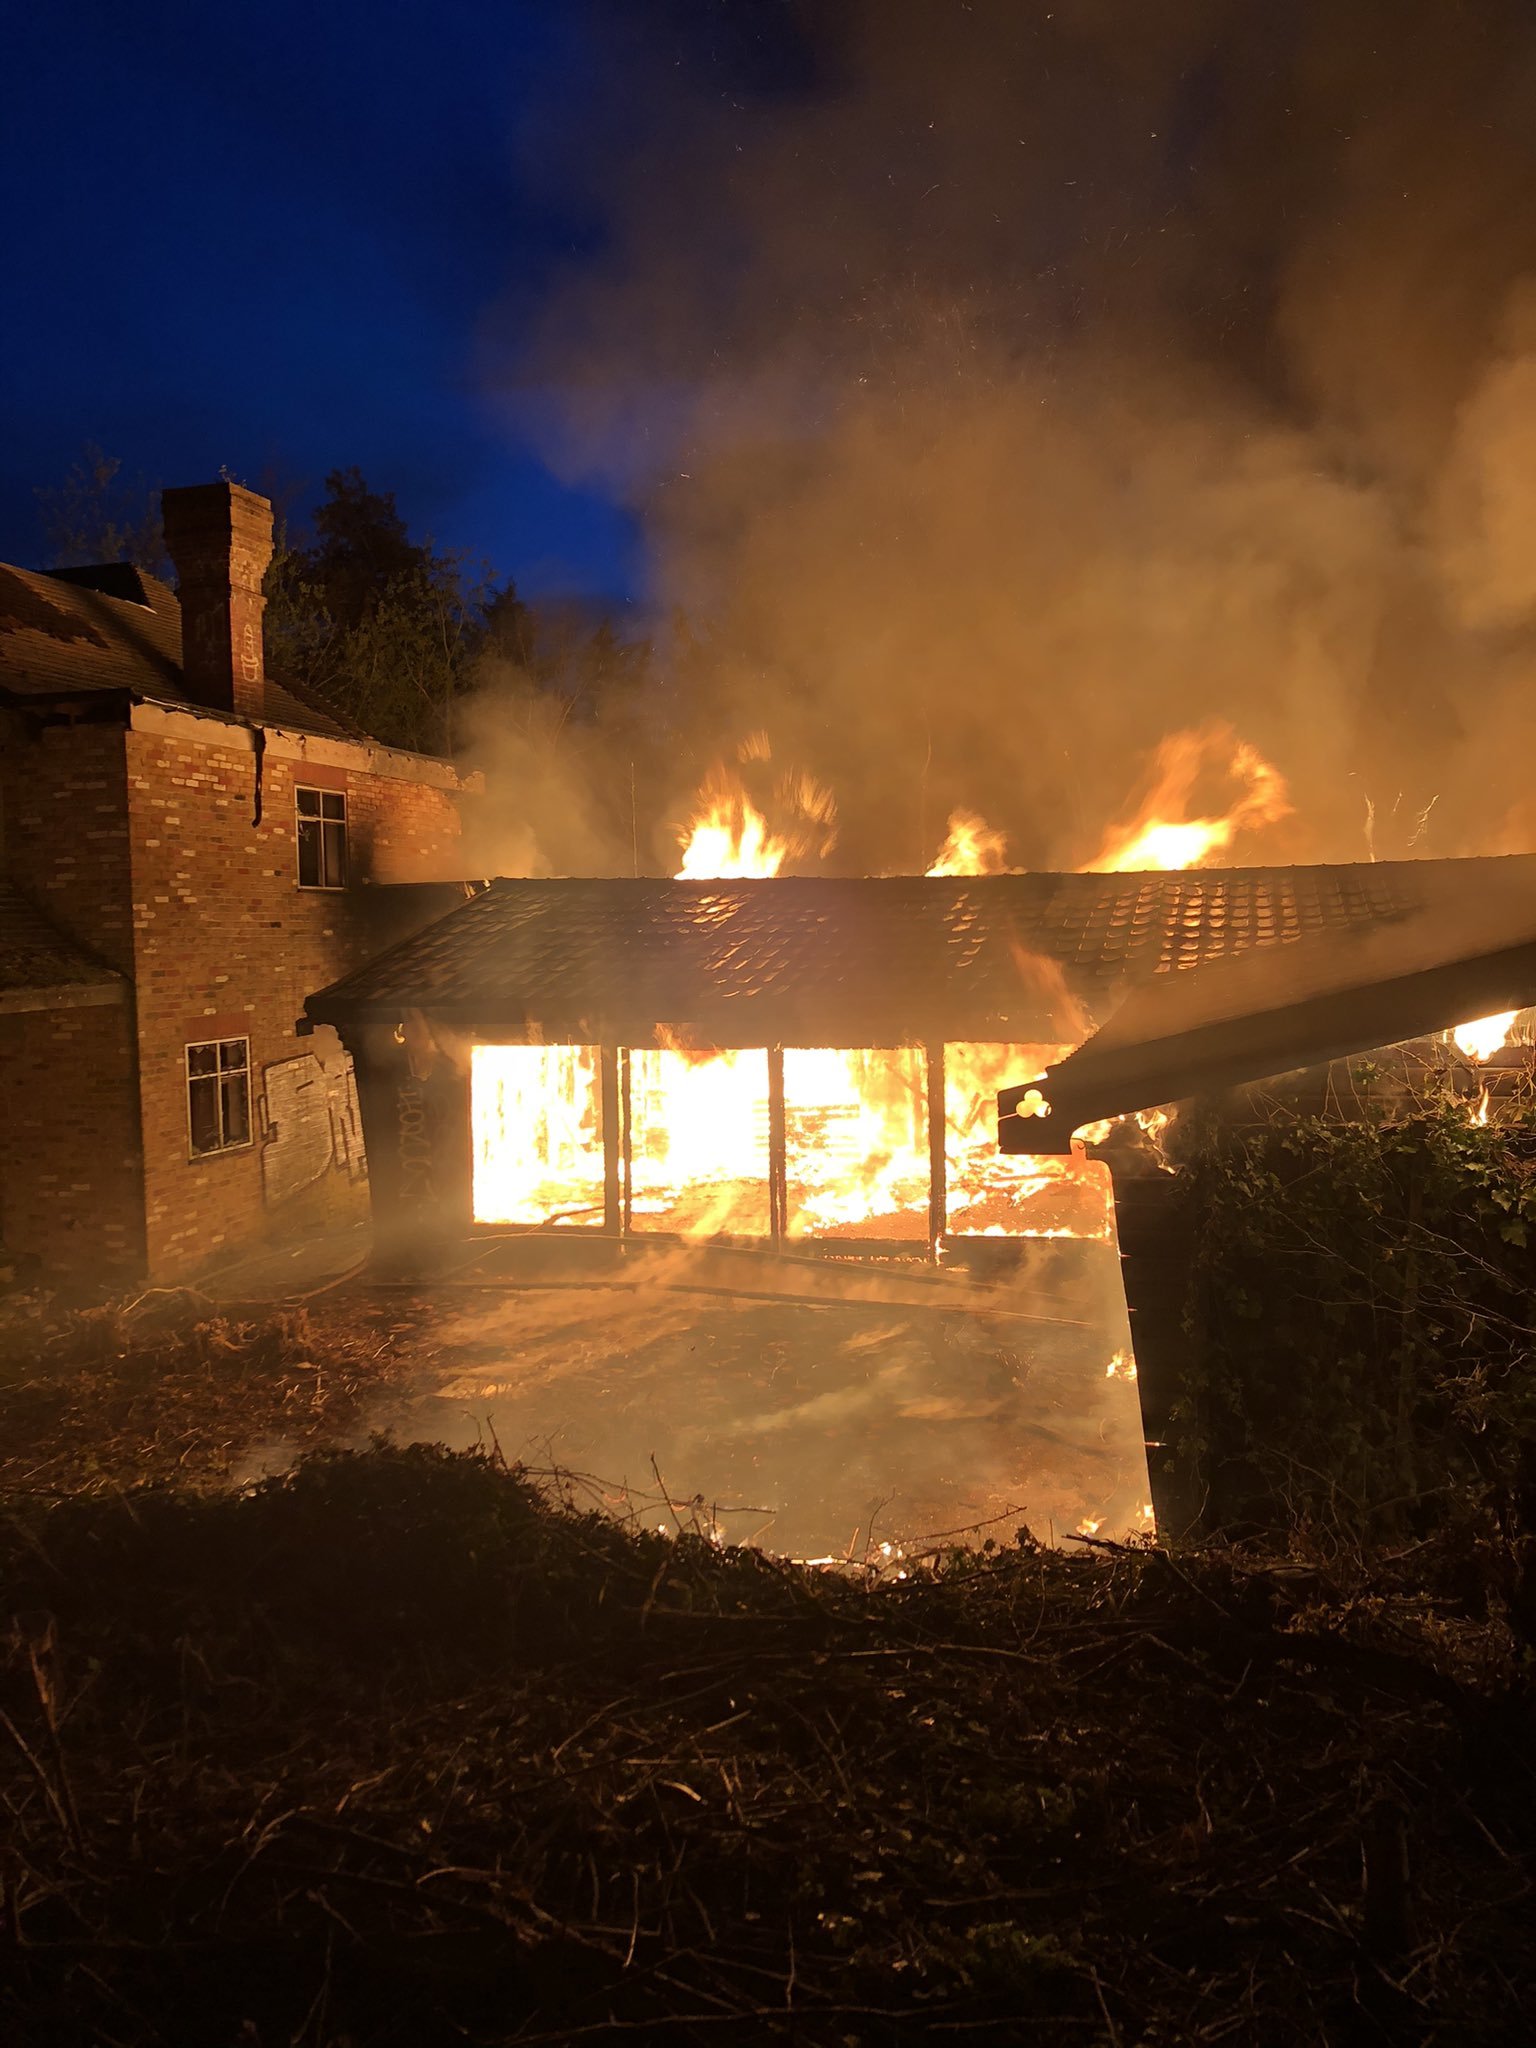 The fire was later safely extinguished. Credit: Stuart Sanders, Hertfordshire Fire & Rescue